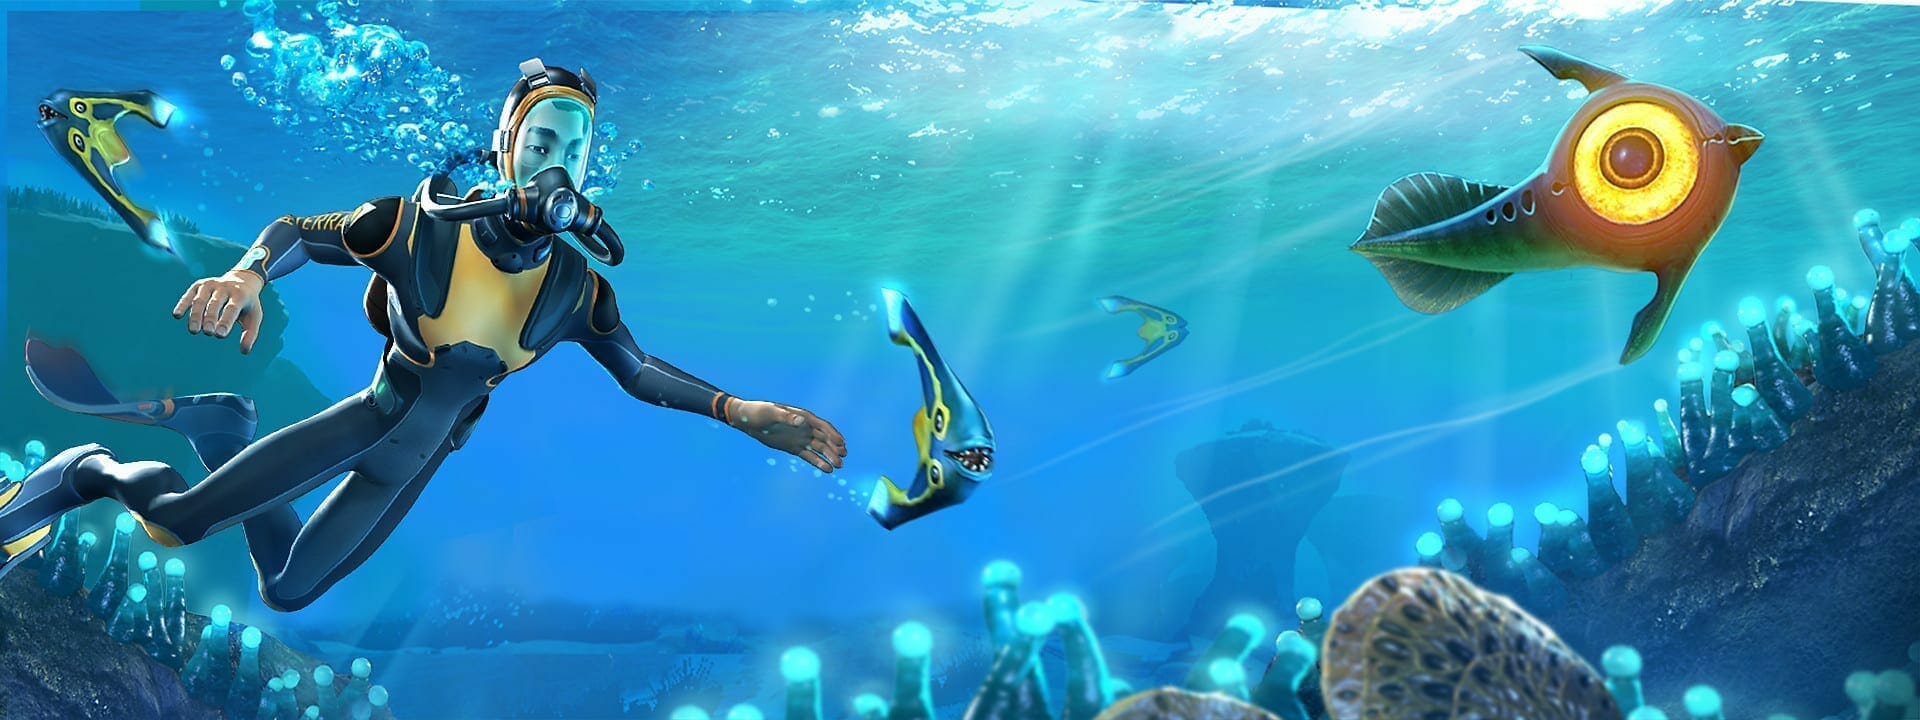 Subnautica for PS4 and Xbox One Release Date